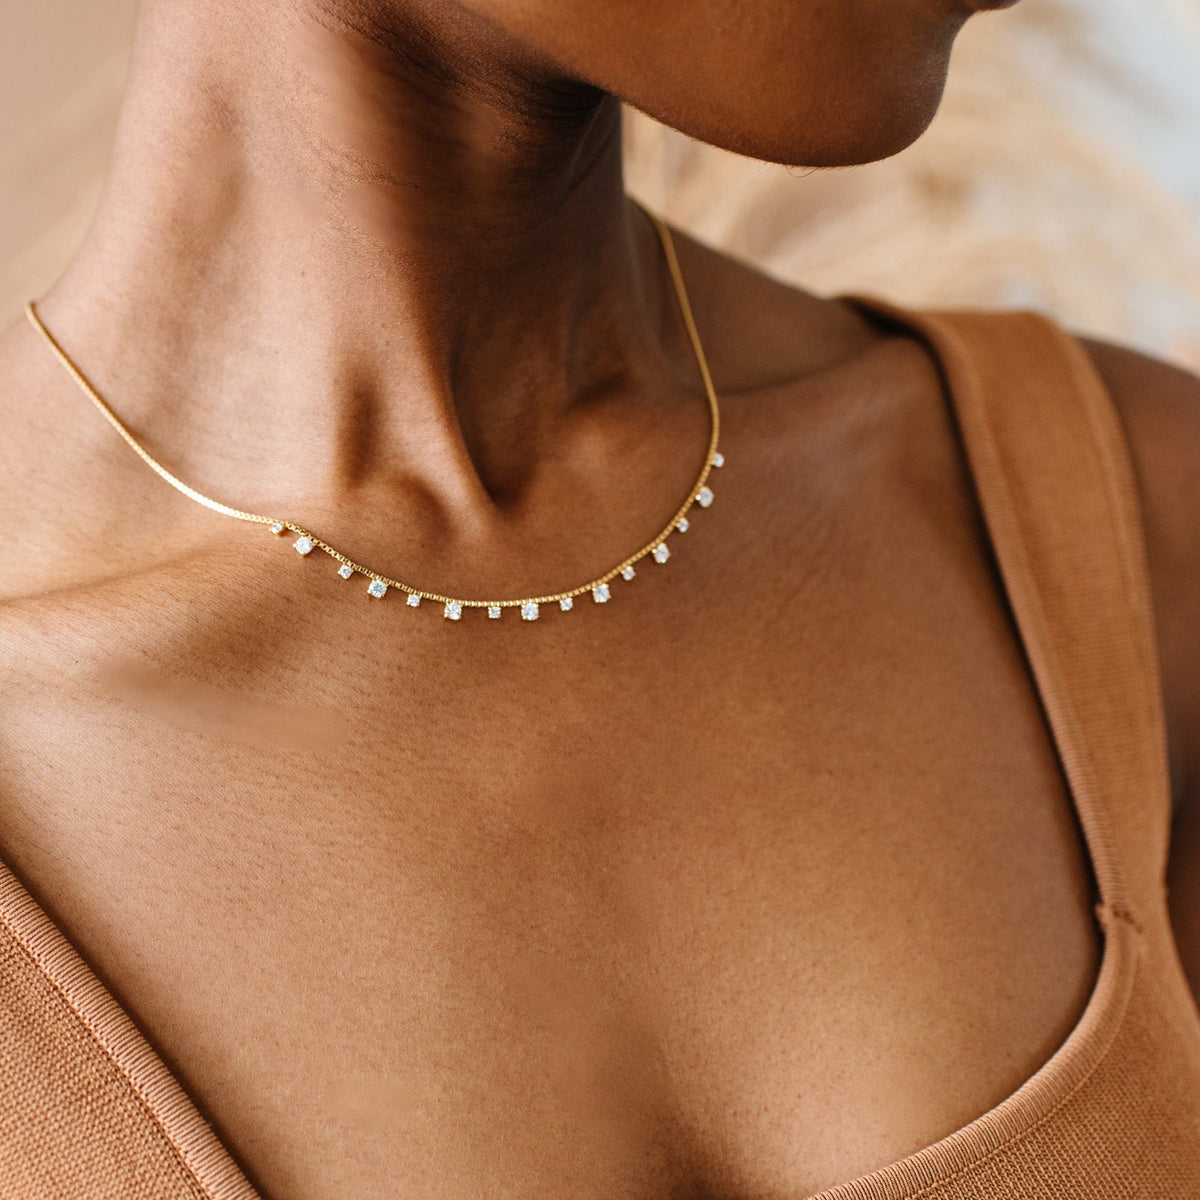 SCATTERED LOVE COLLAR NECKLACE - CUBIC ZIRCONIA &amp; GOLD - SO PRETTY CARA COTTER